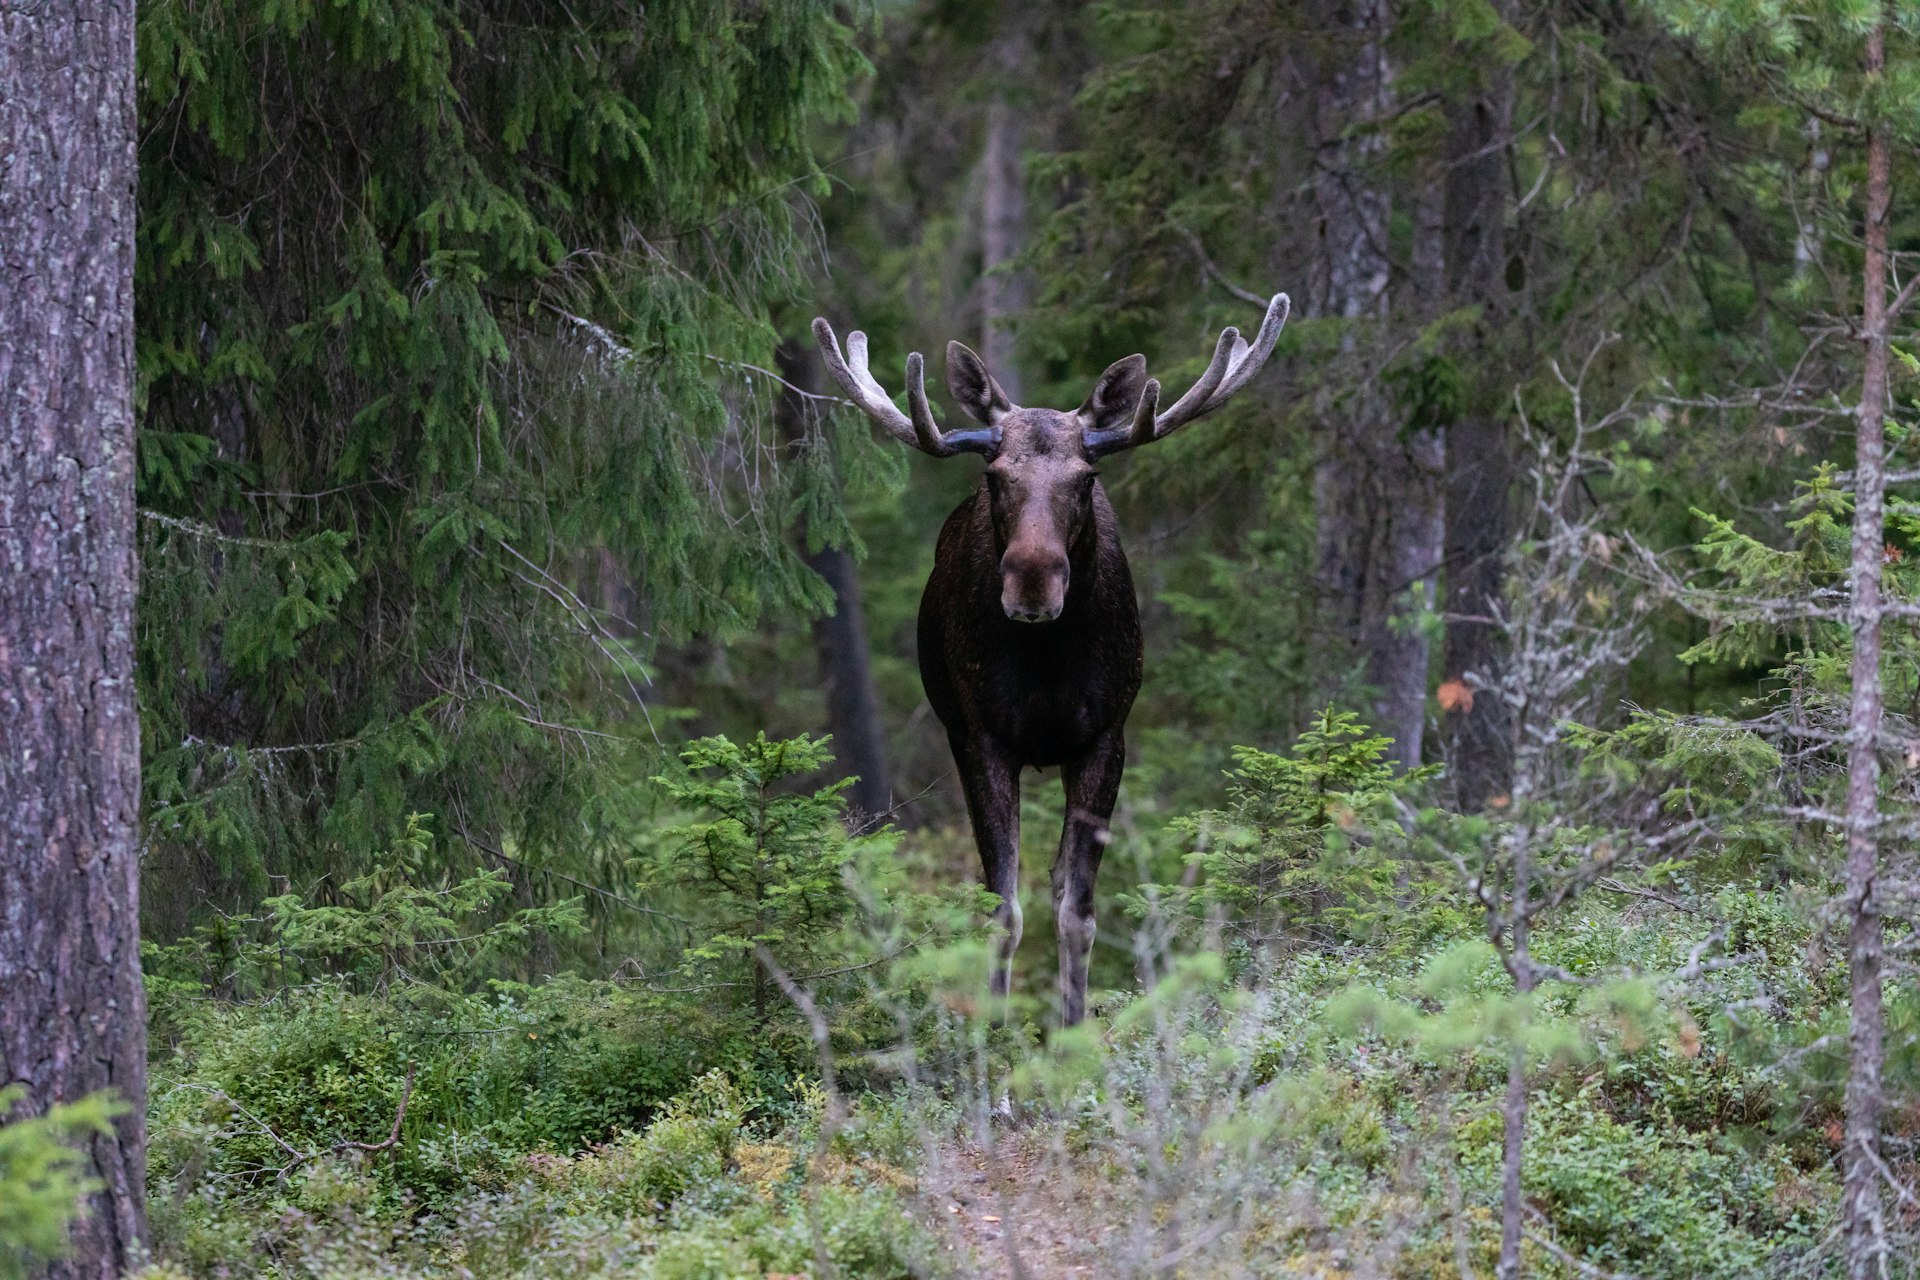 A male elk stares at the camera in a forest in Finland, summer